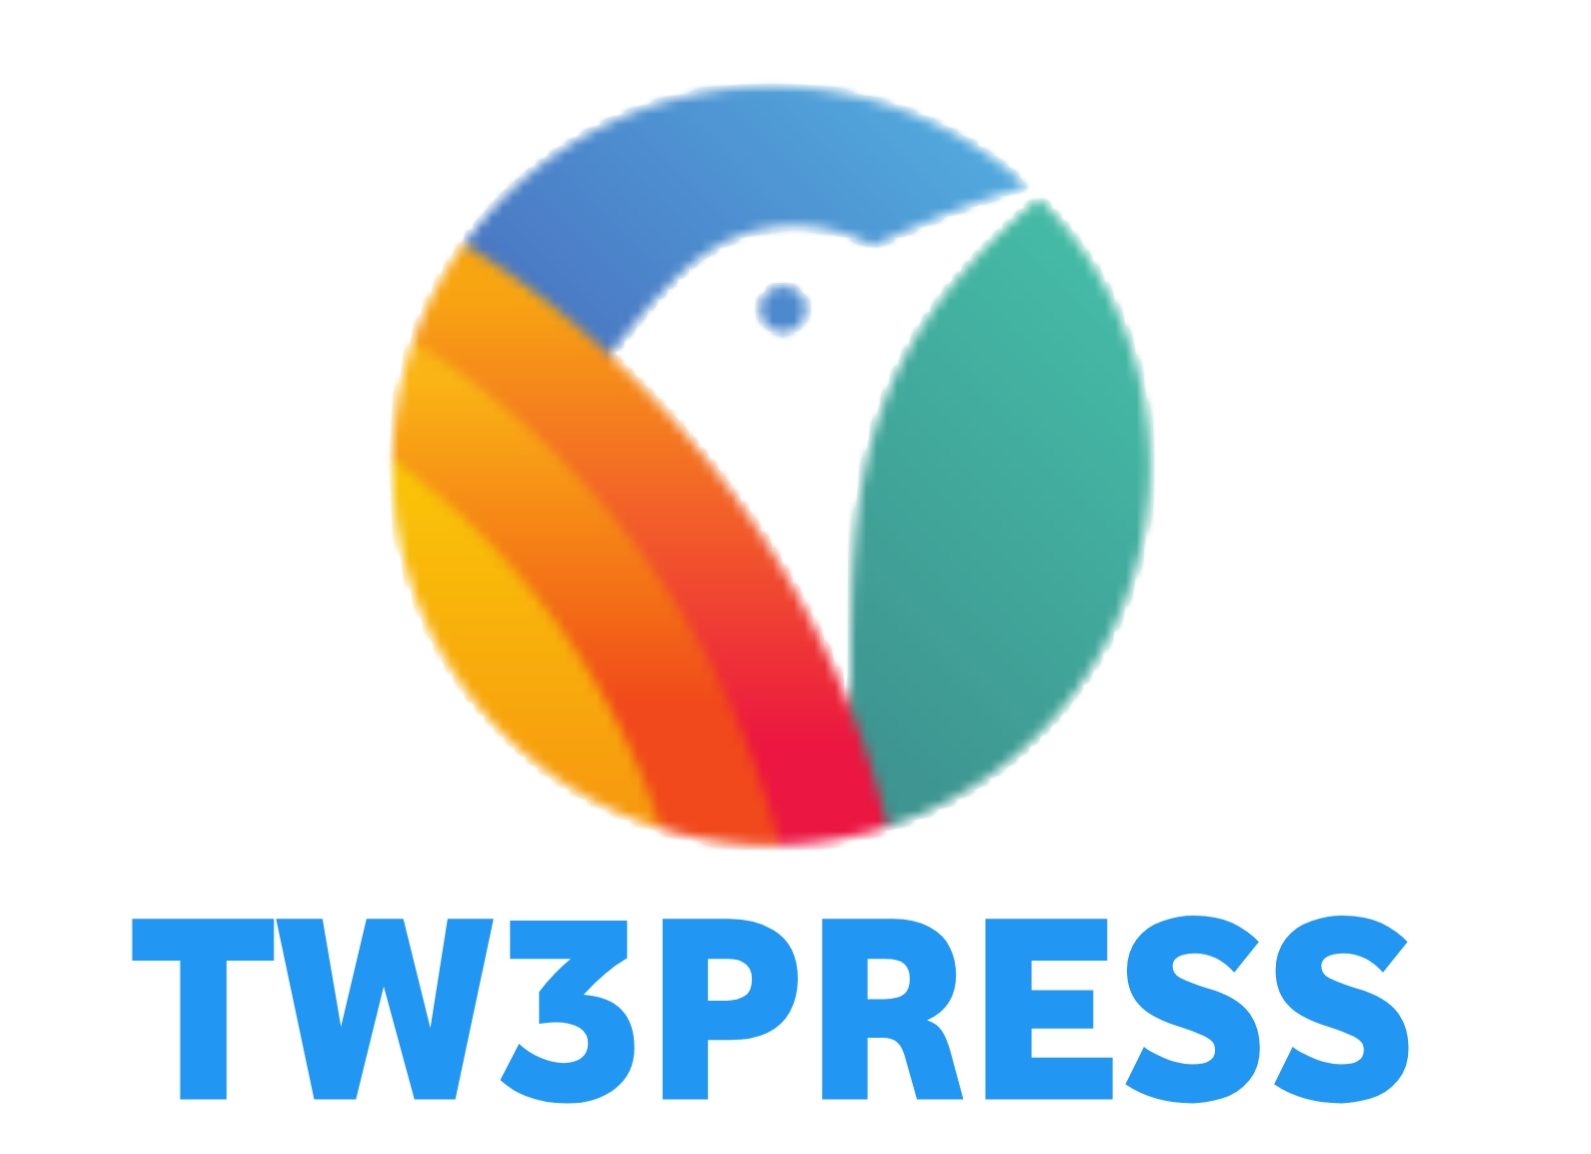 About of Tw3press